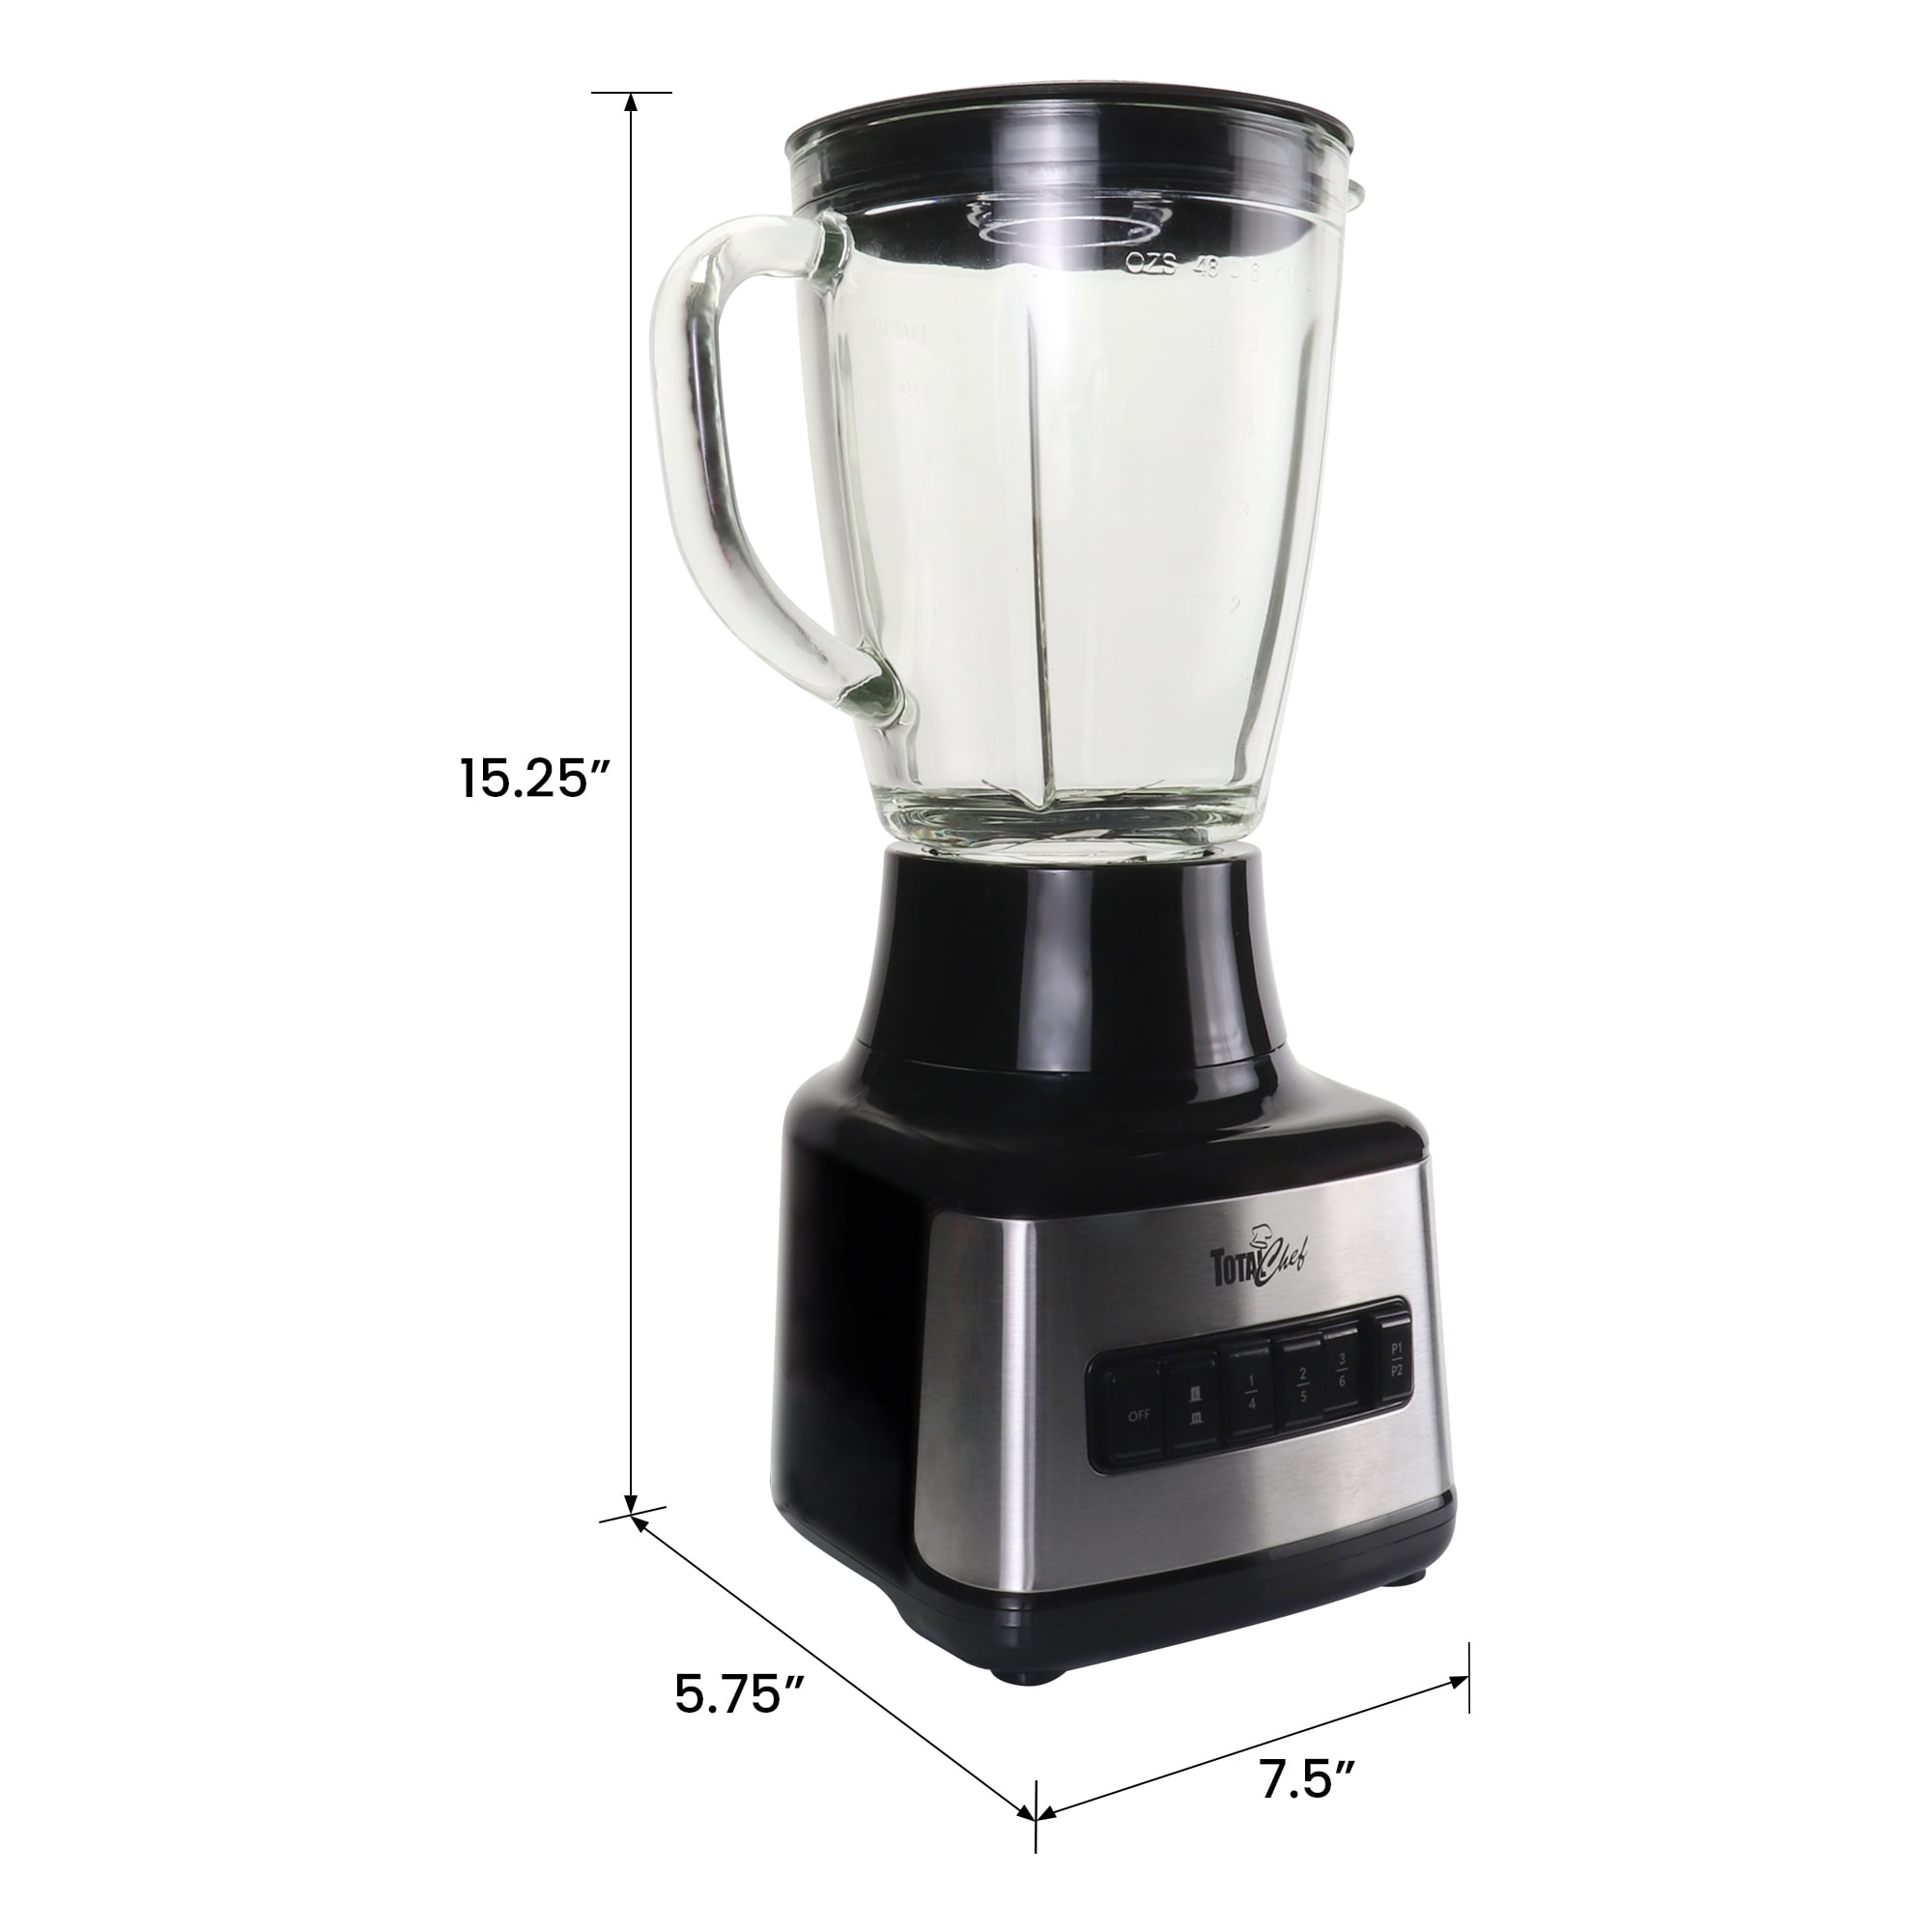 12 Oz Electric Blender - SPVY518 - IdeaStage Promotional Products